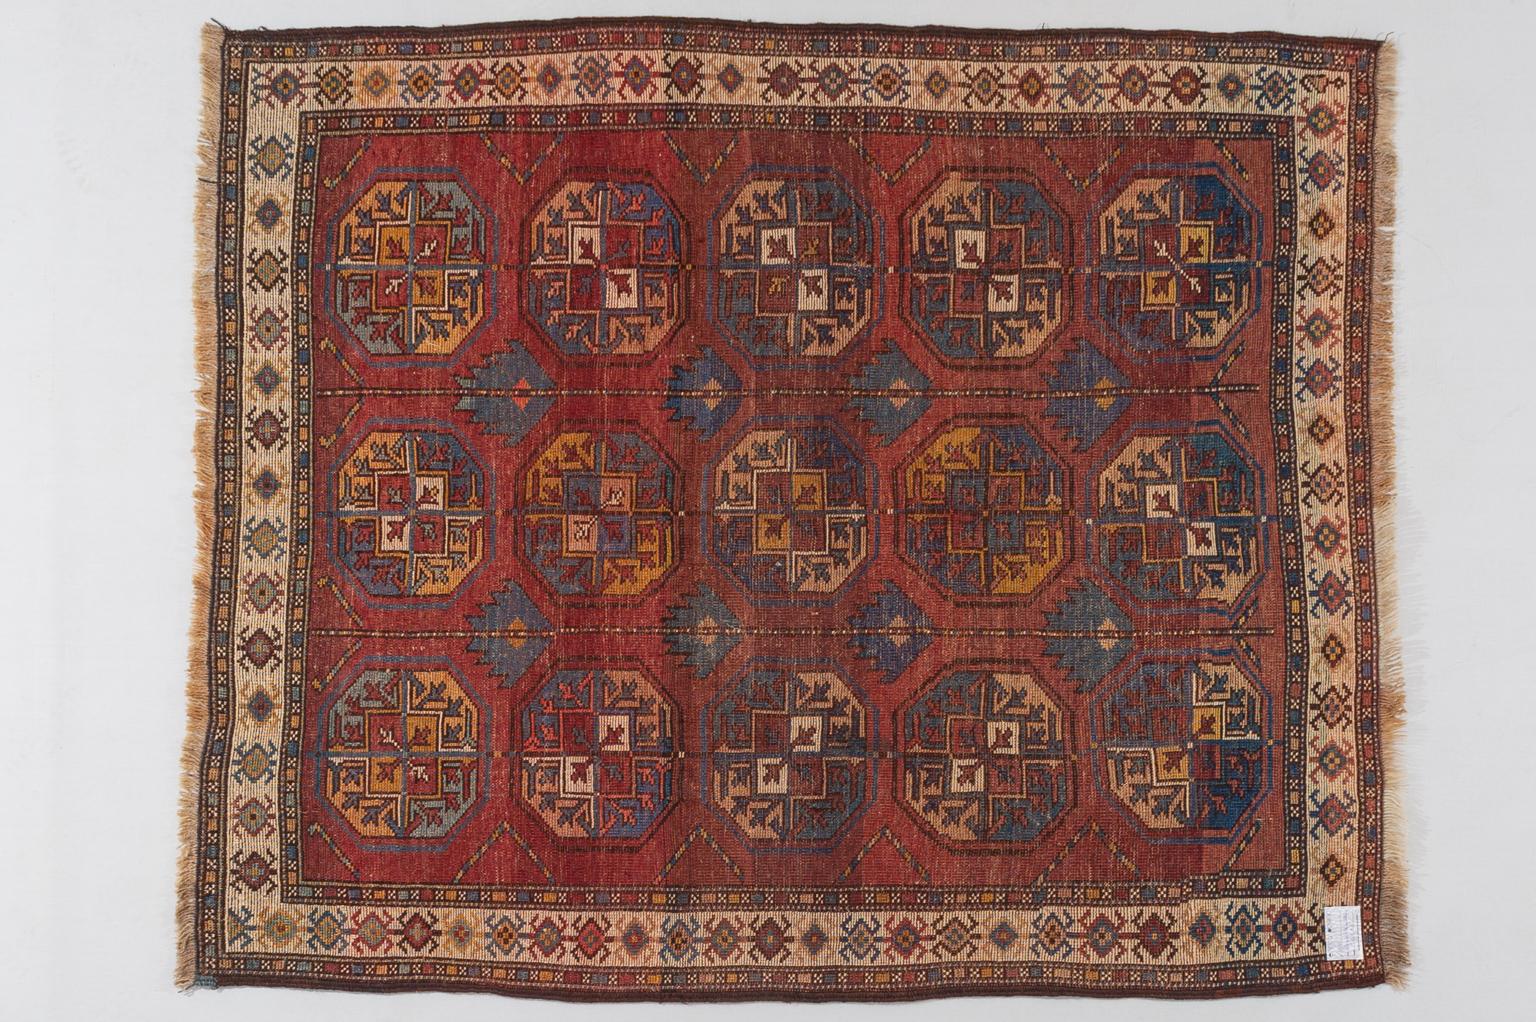 Unusual Armenian carpet in Bokara design with bright blue details.
The unusual size and the very soft wool make it ideal resting on a sofa or even on the bed!  However, it is always a soft carpet...
